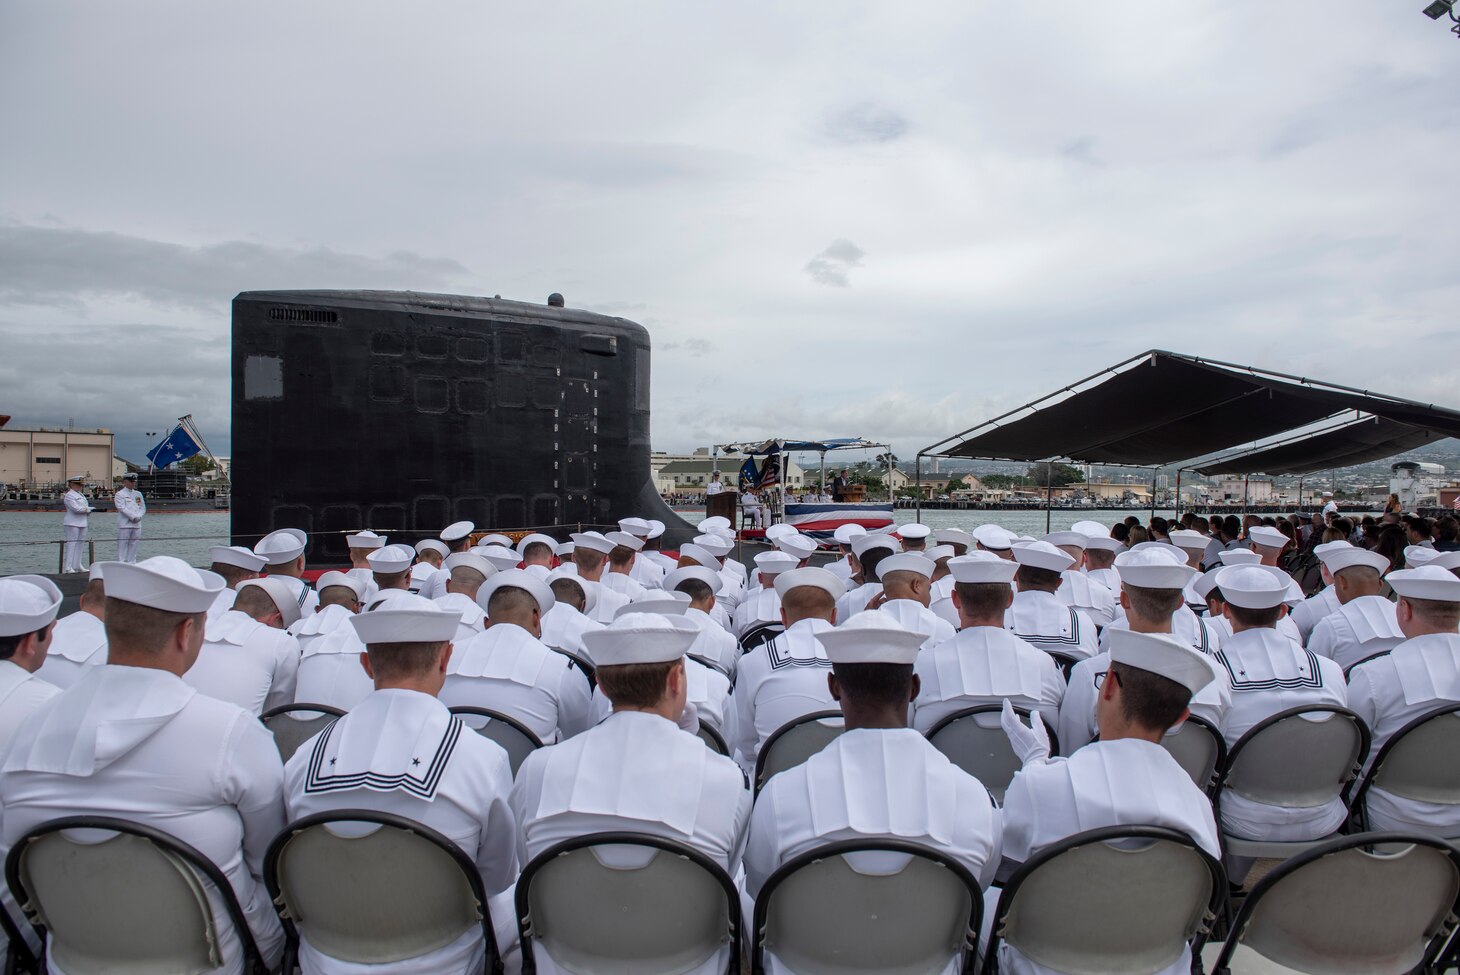 180508-N-LY160-0092 PEARL HARBOR (May 8, 2018) - The crew of the Virginia-class fast-attack submarine USS Mississippi (SSN 782) and guests attend a change of command ceremony on the submarine piers in Joint Base Pearl Harbor-Hickam, May 8. Cmdr. Heath E. Johnmeyer relieved Cmdr. Eric J. Rozek as Mississippi commanding officer. (U.S. Navy photo by Mass Communication Specialist 2nd Class Michael Lee/Released)